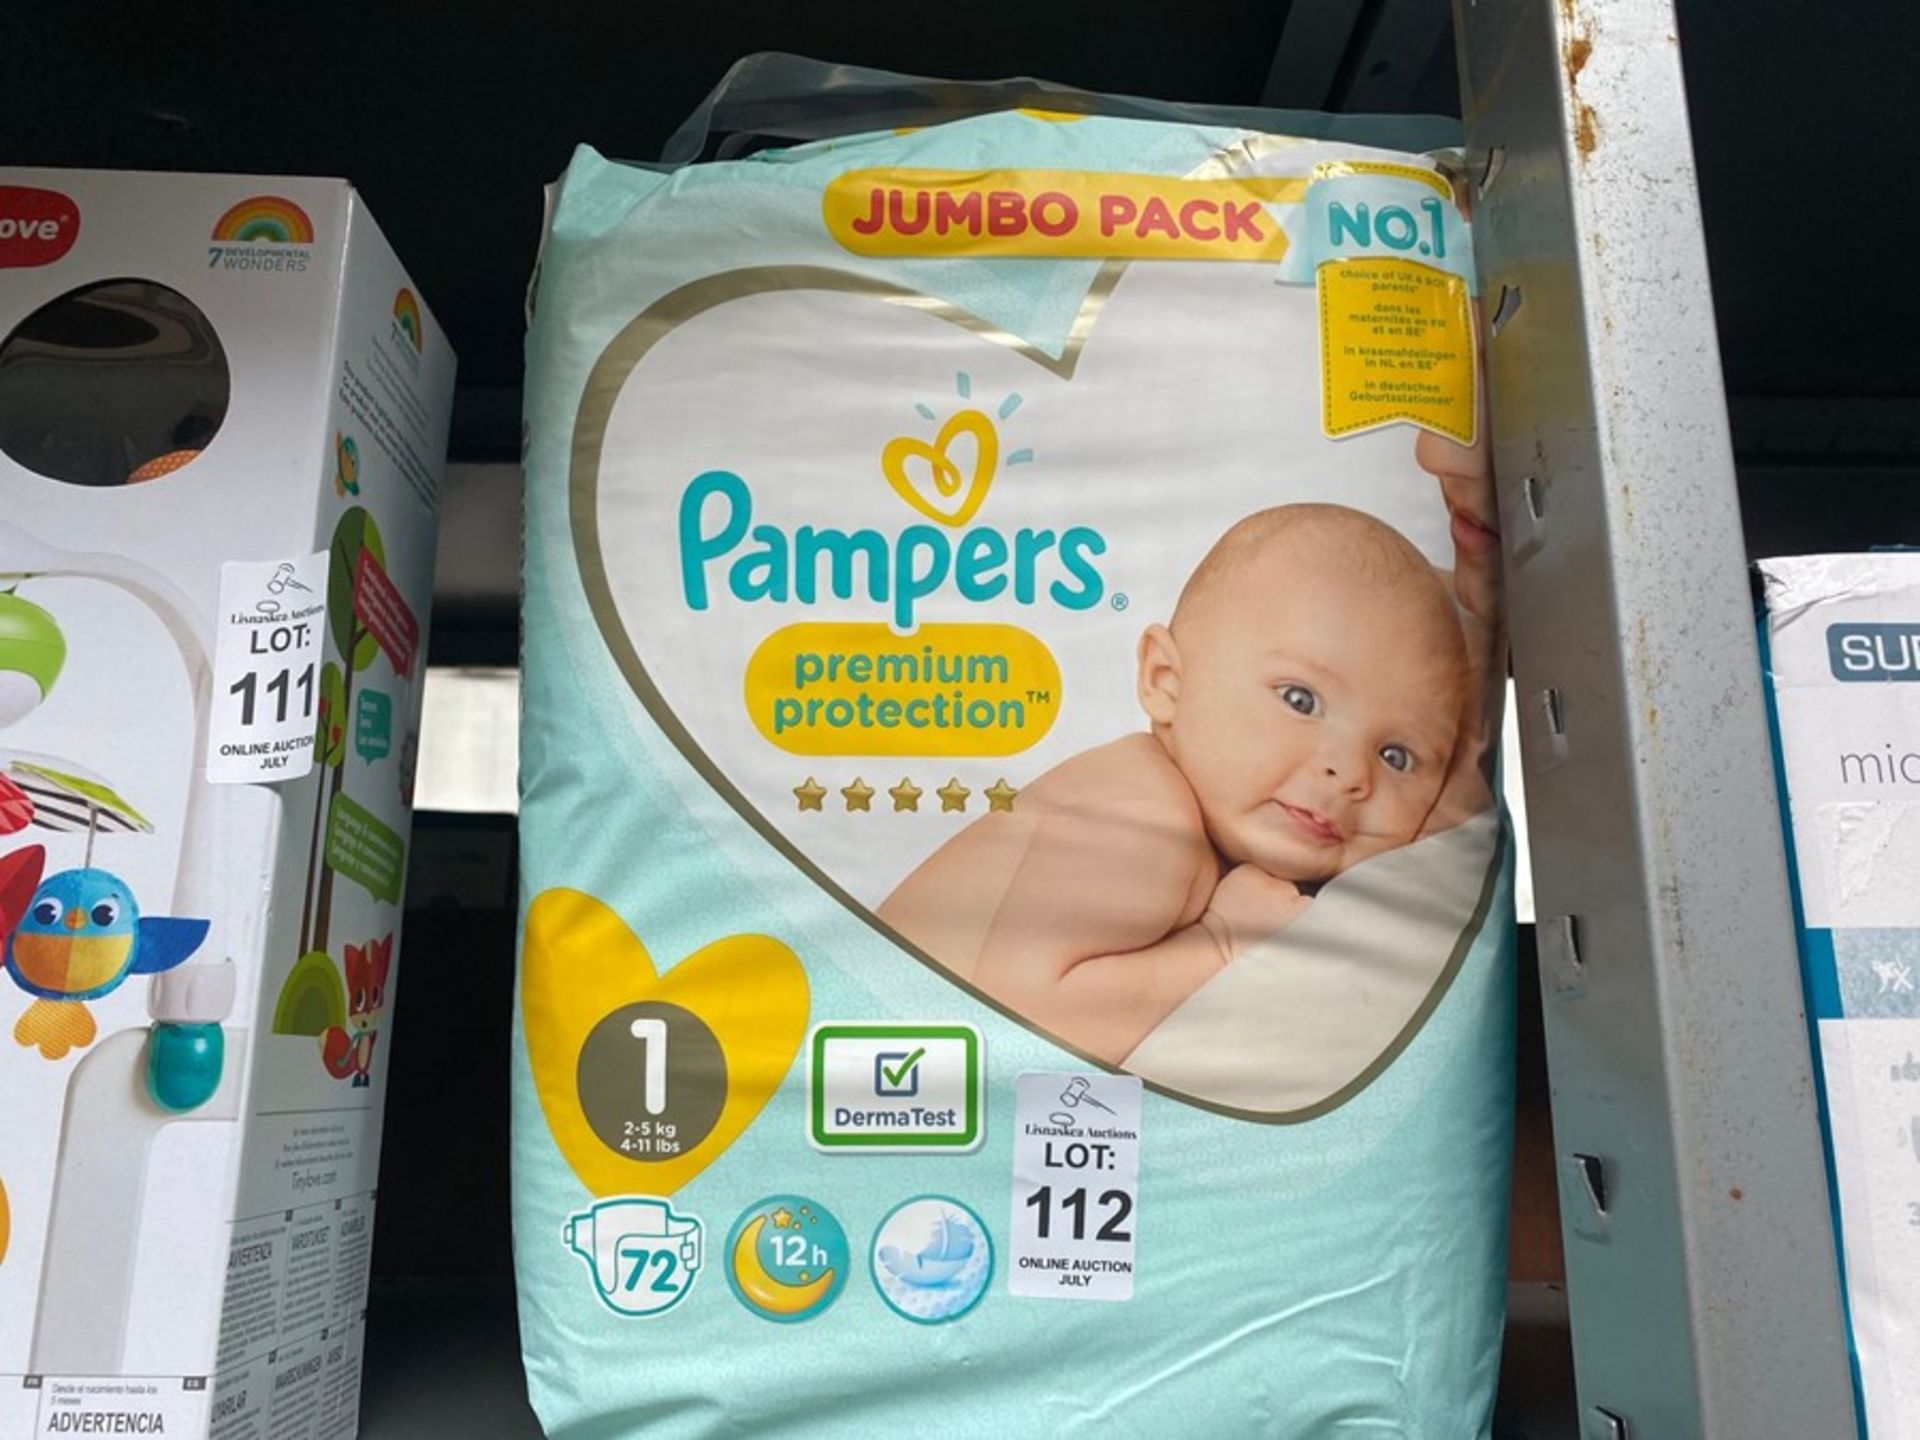 JUMBO PACK OF PAMPERS NAPPIES (SIZE 1)